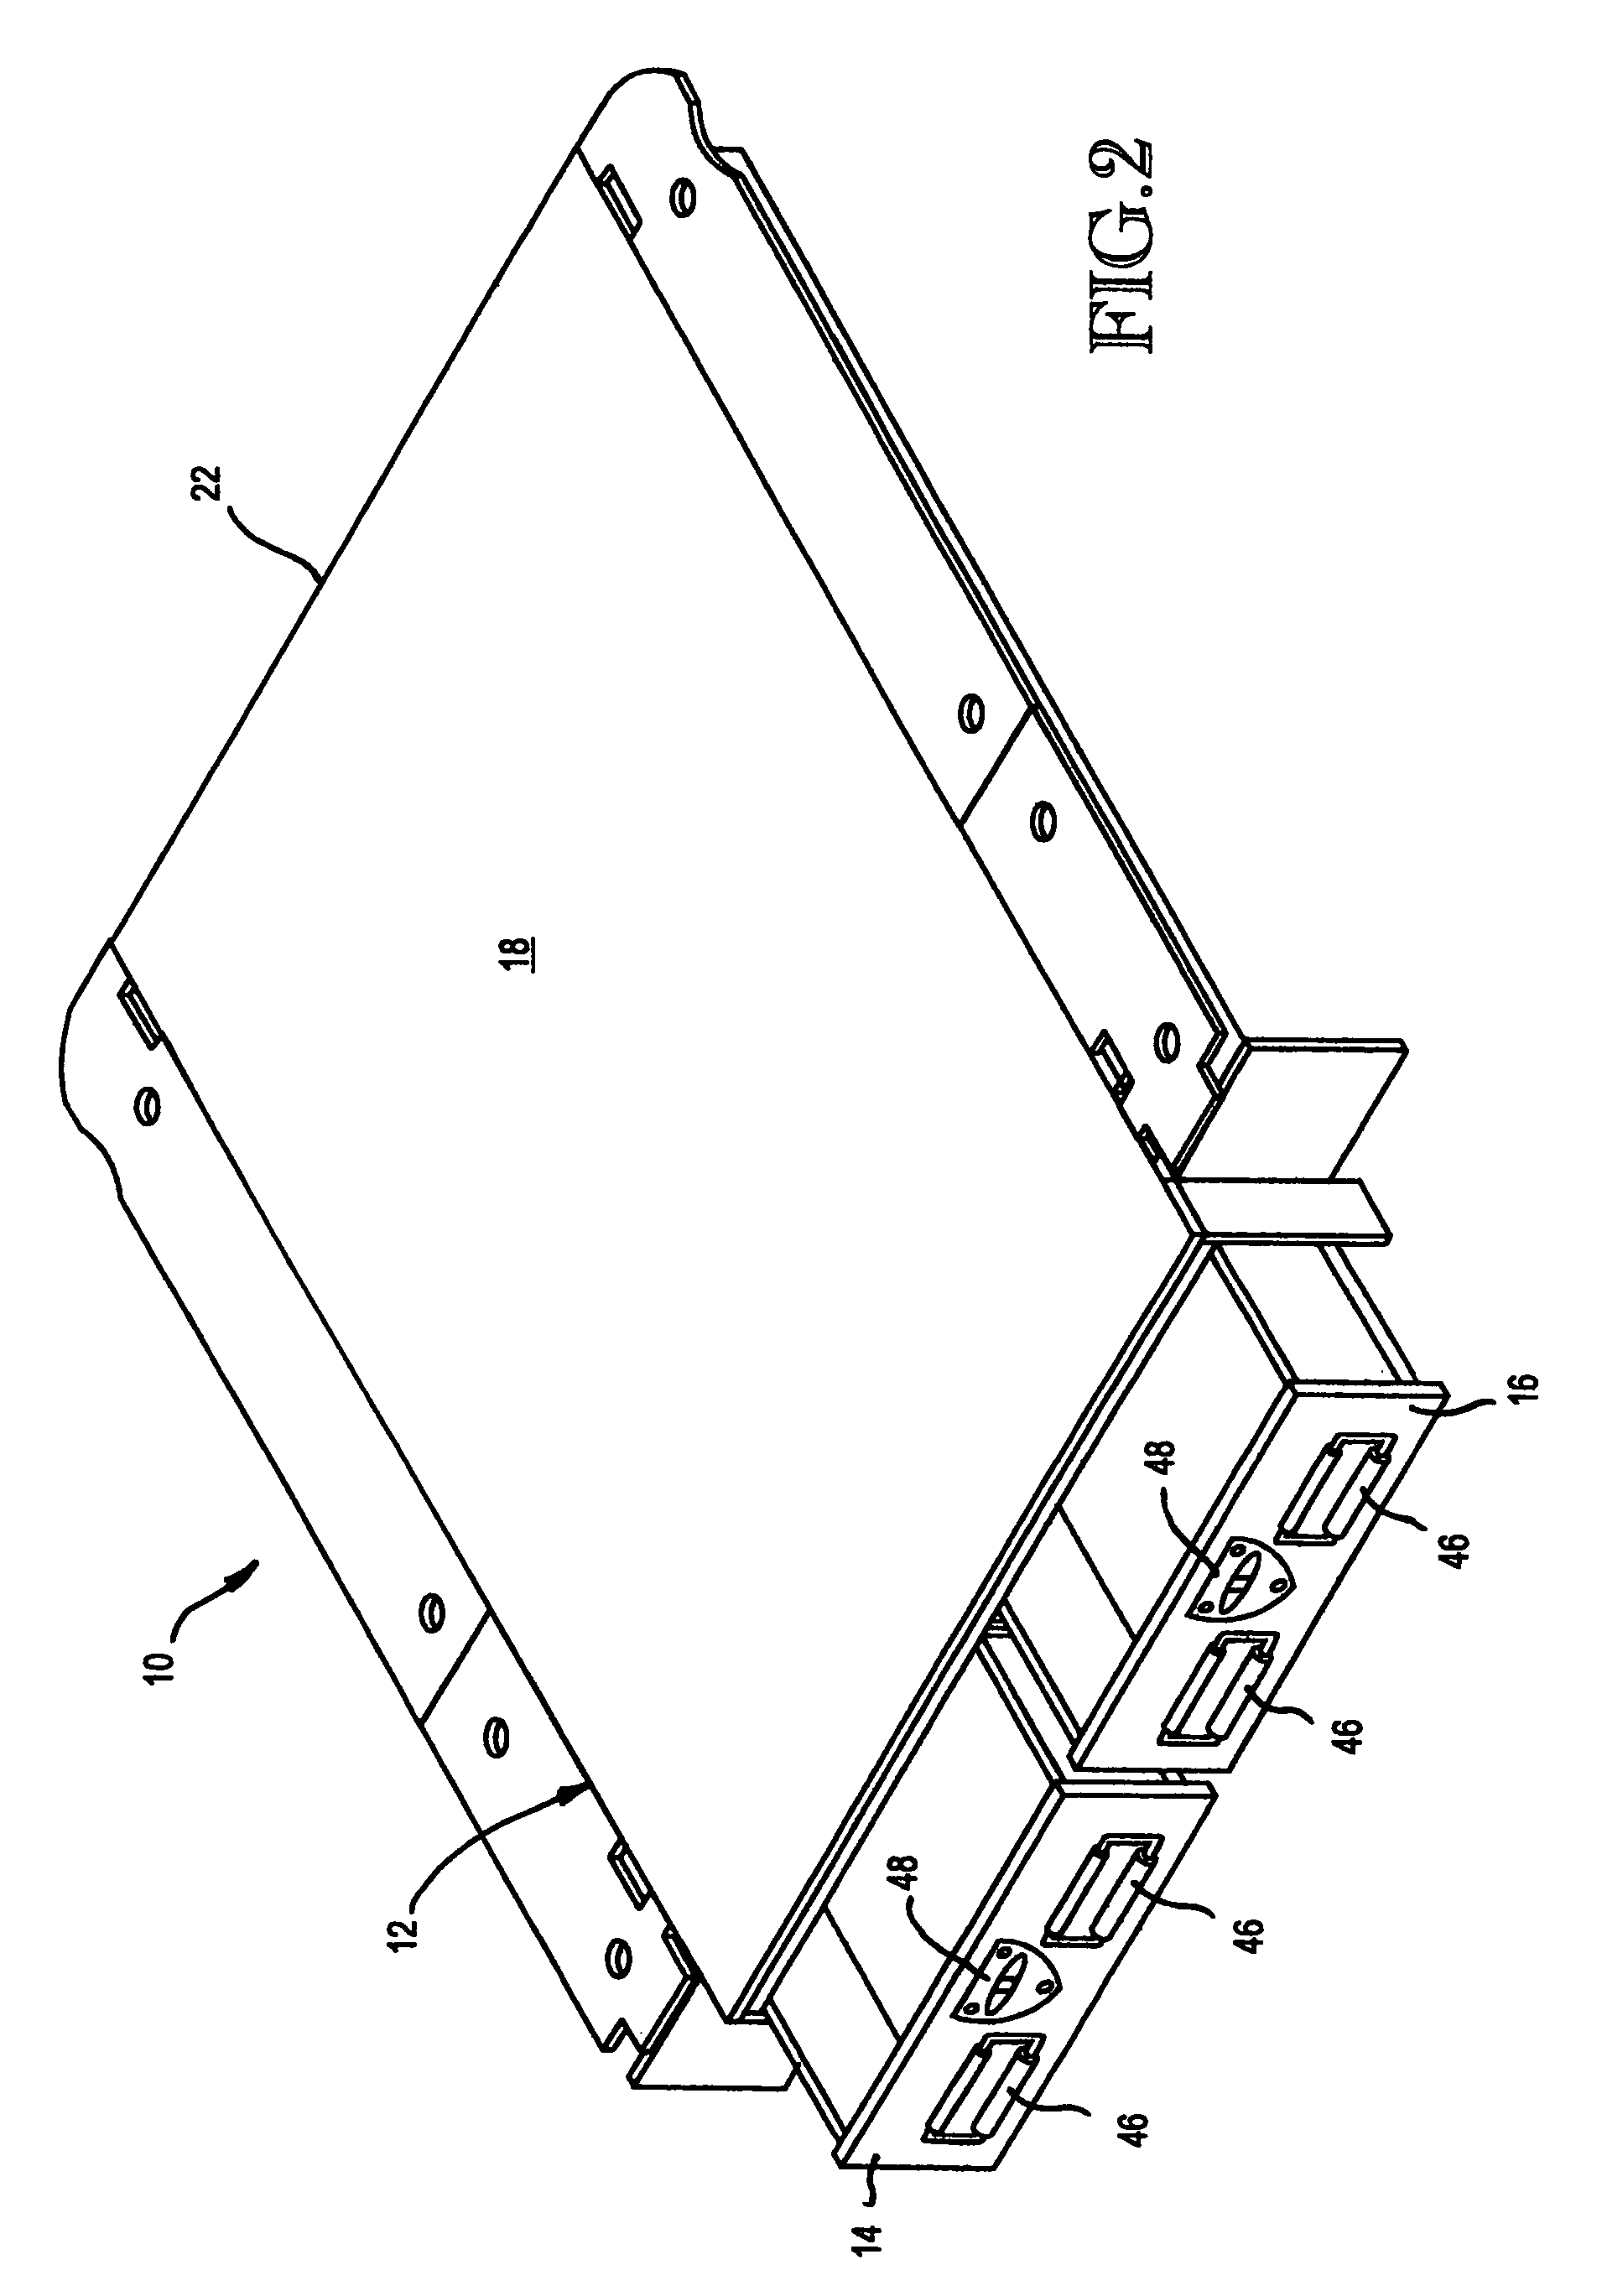 Water-resistant storage system for pickup trucks and utility vehicles